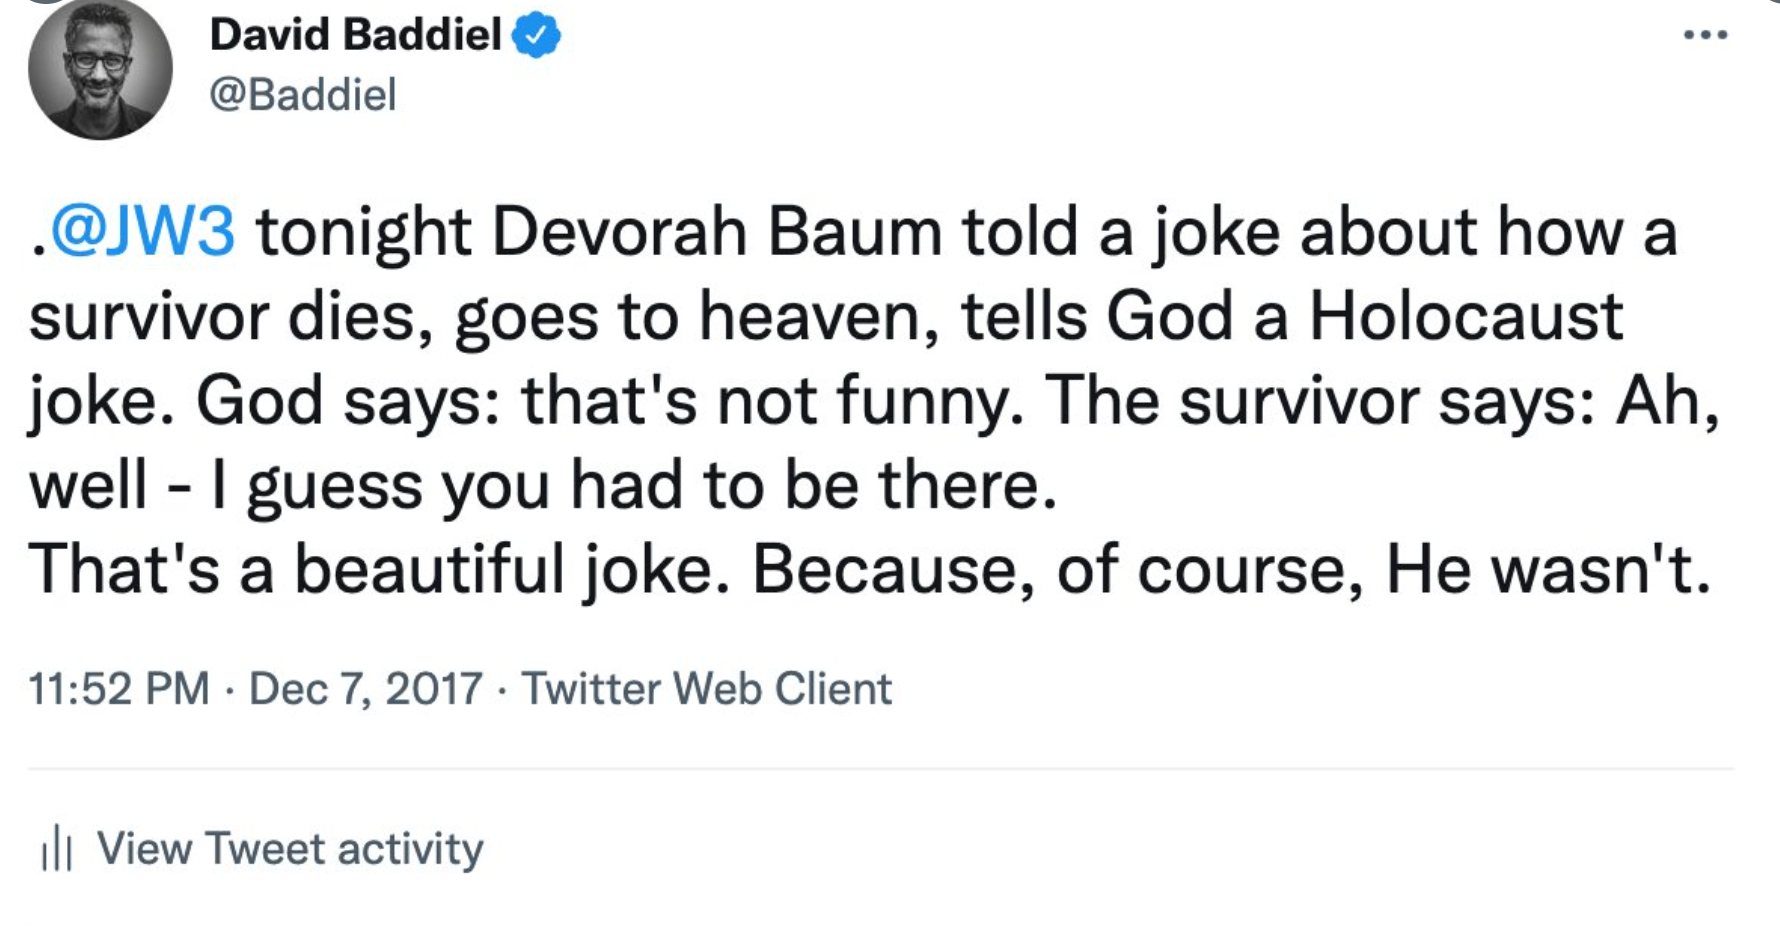 David Baddiel shared what he believes to be an acceptable joke about the Holocaust